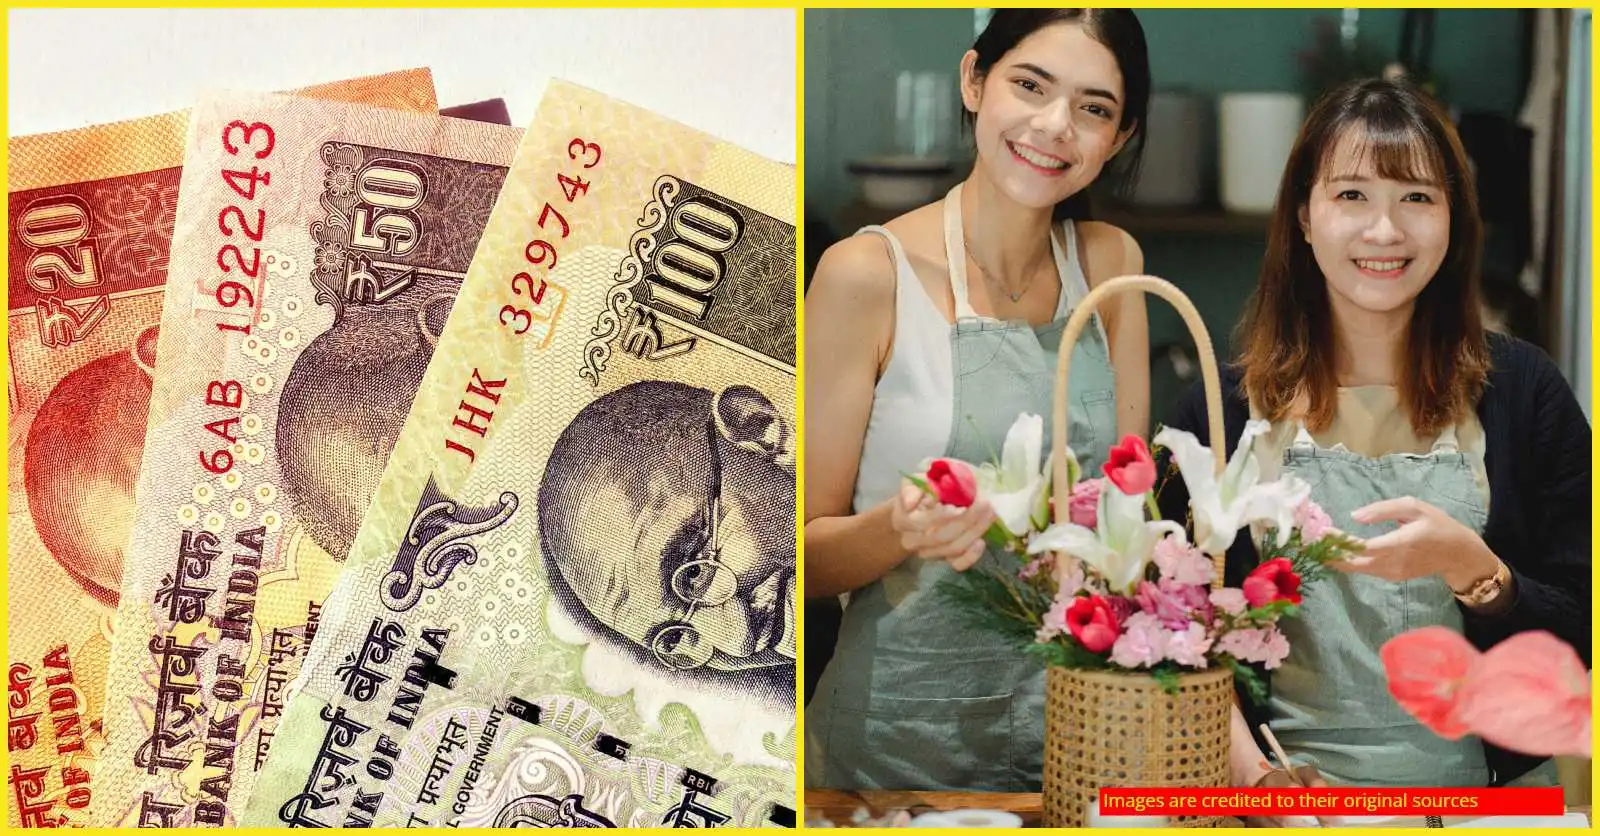 A women smiling and doing work, symbolizing the financial relief and fulfillment achieved through Piramal Finance personal loan. Indian rupees currency is included to highlight the platform's focus on Indian borrowers